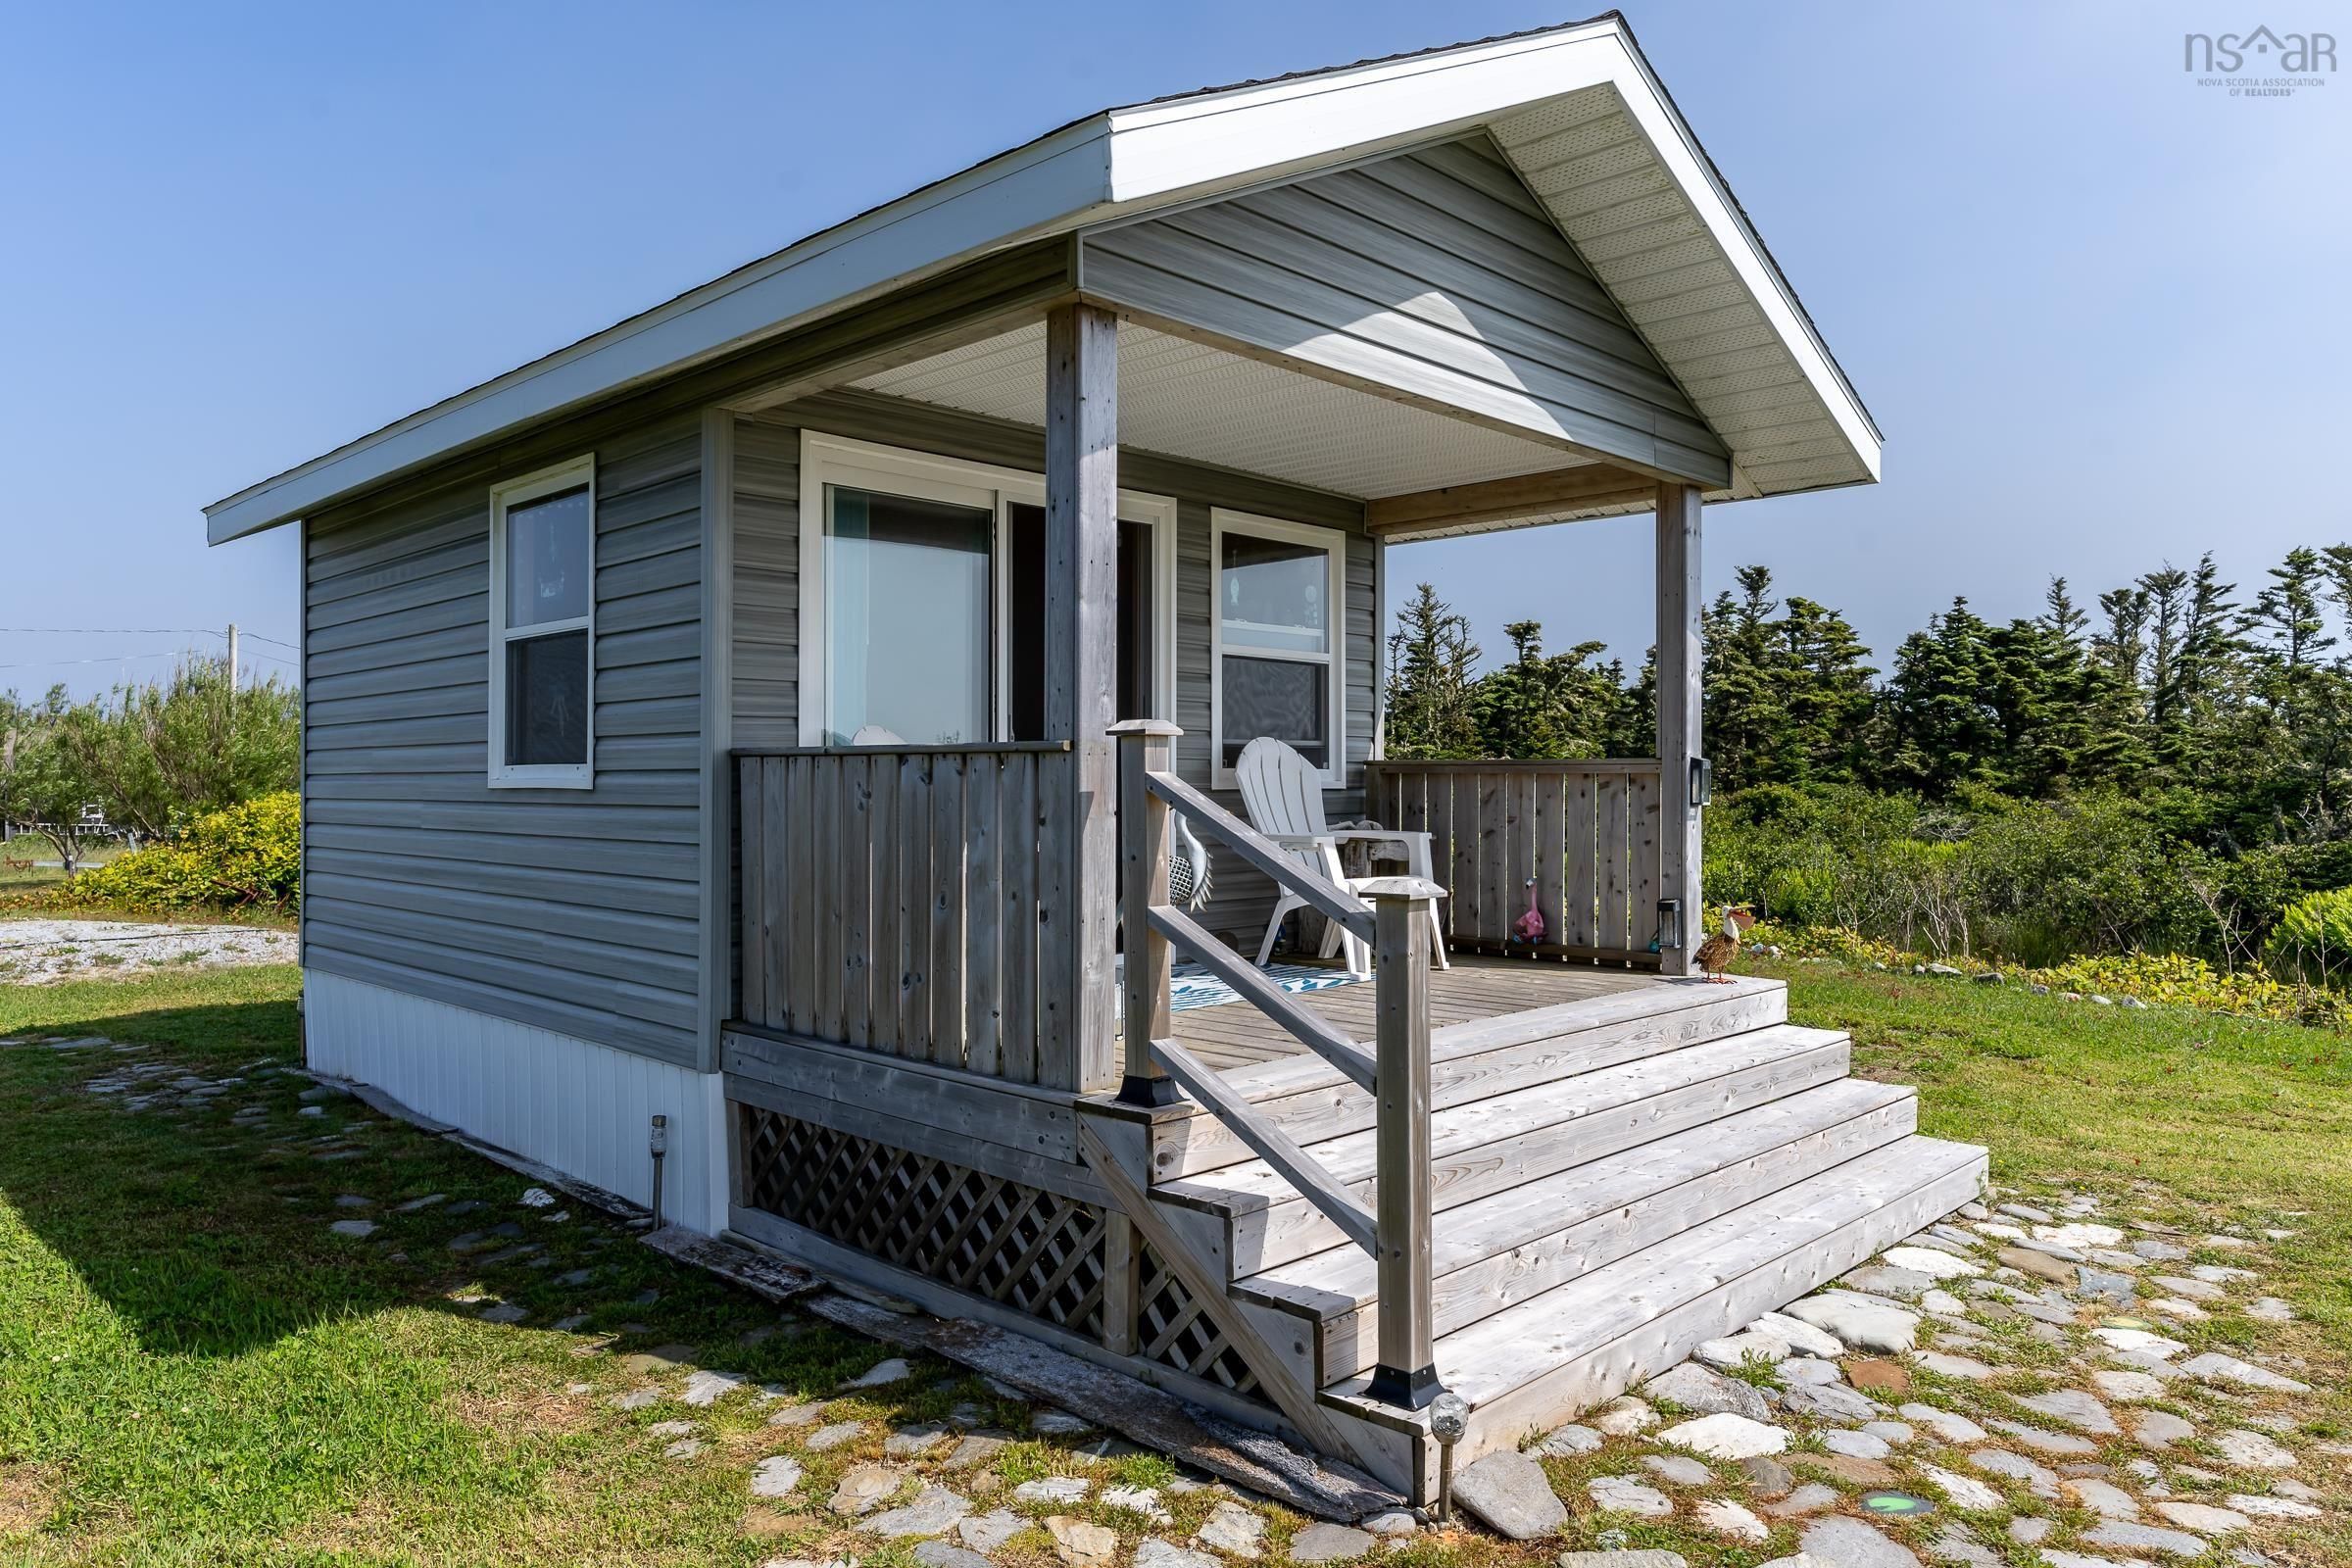 Main Photo: 487 Hawk Point Road in The Hawk: 407-Shelburne County Residential for sale (South Shore)  : MLS®# 202120860